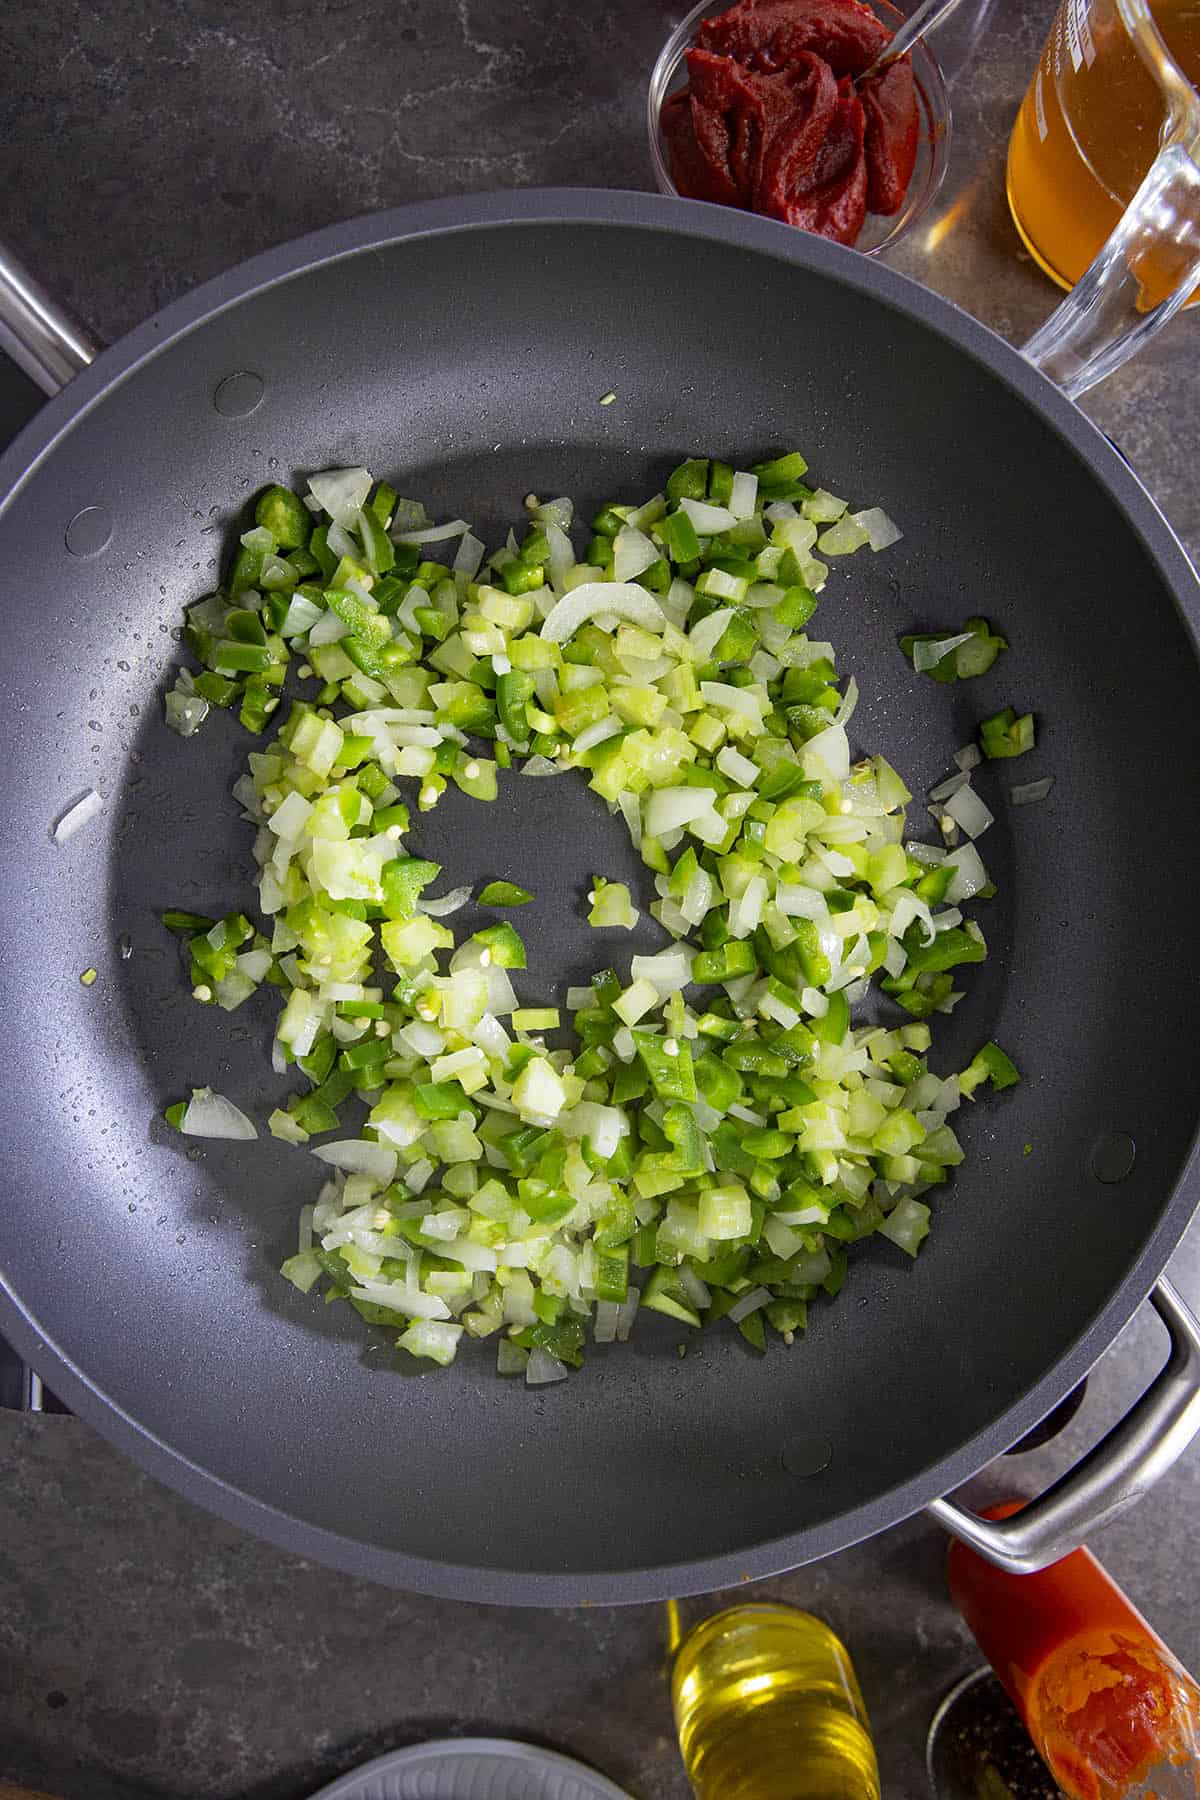 Cooking down peppers and onions in a pan.